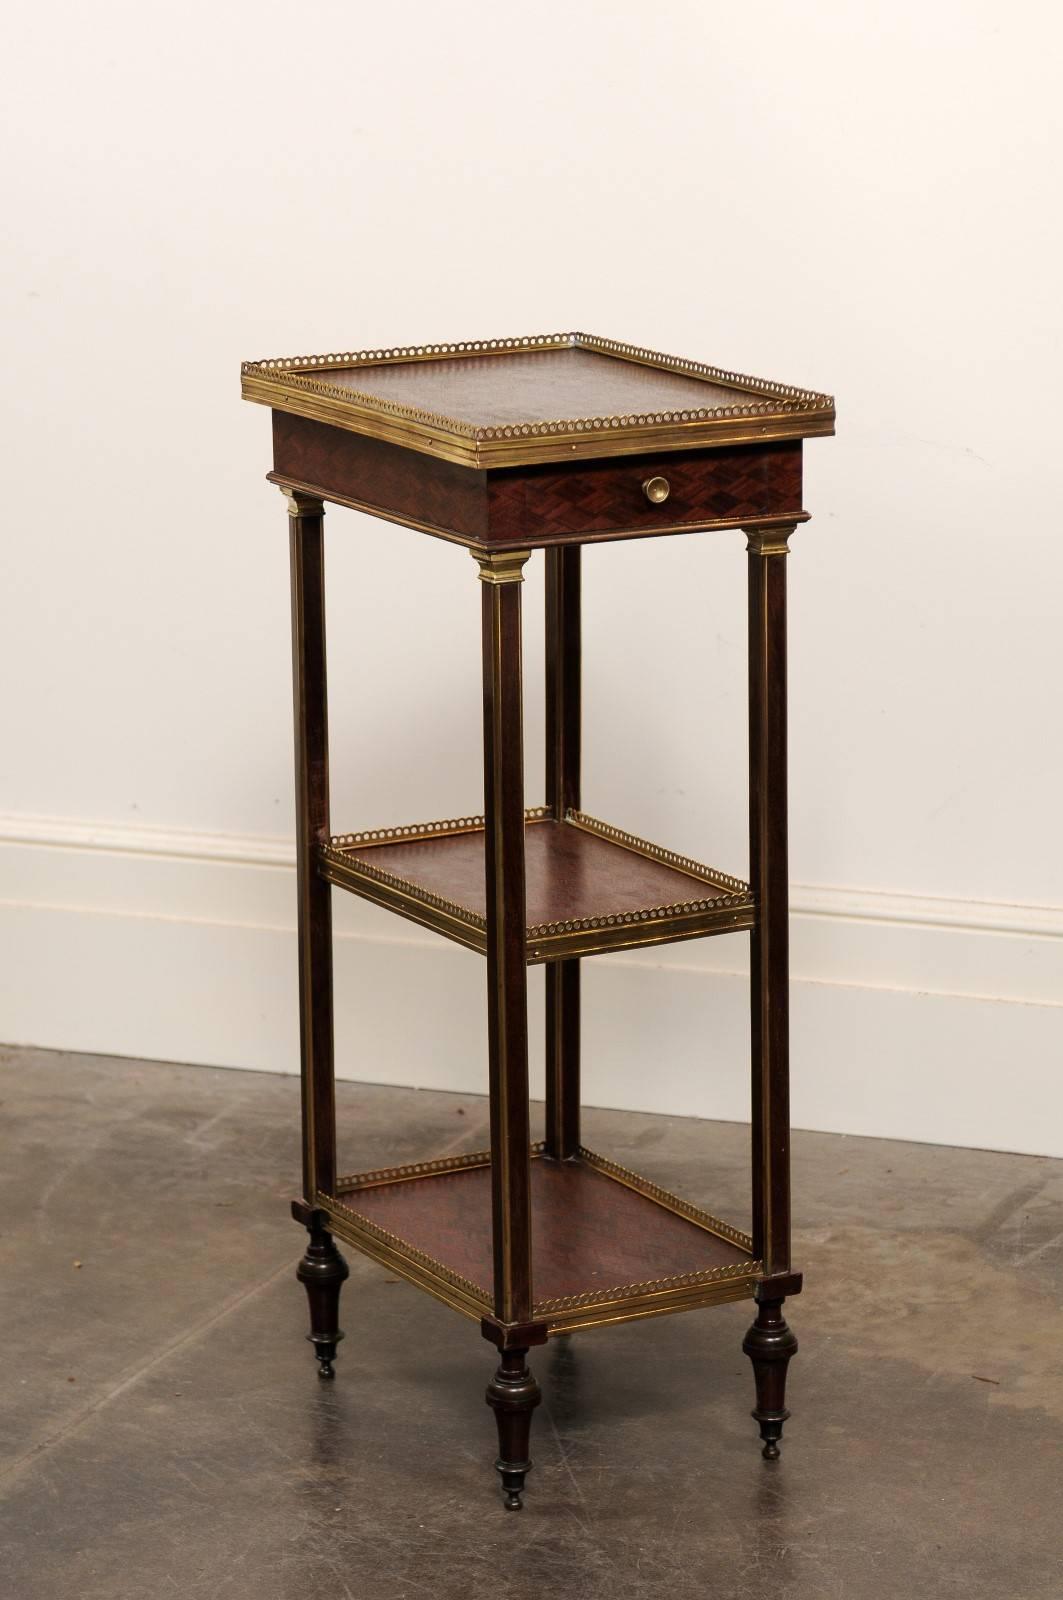 This English mahogany étagère from the late 19th century features three parquetry decorated shelves surrounded by a delicate brass gallery. The upper shelf contains a single drawer adorned with parquetry inlay. The ensemble is secured by thin square